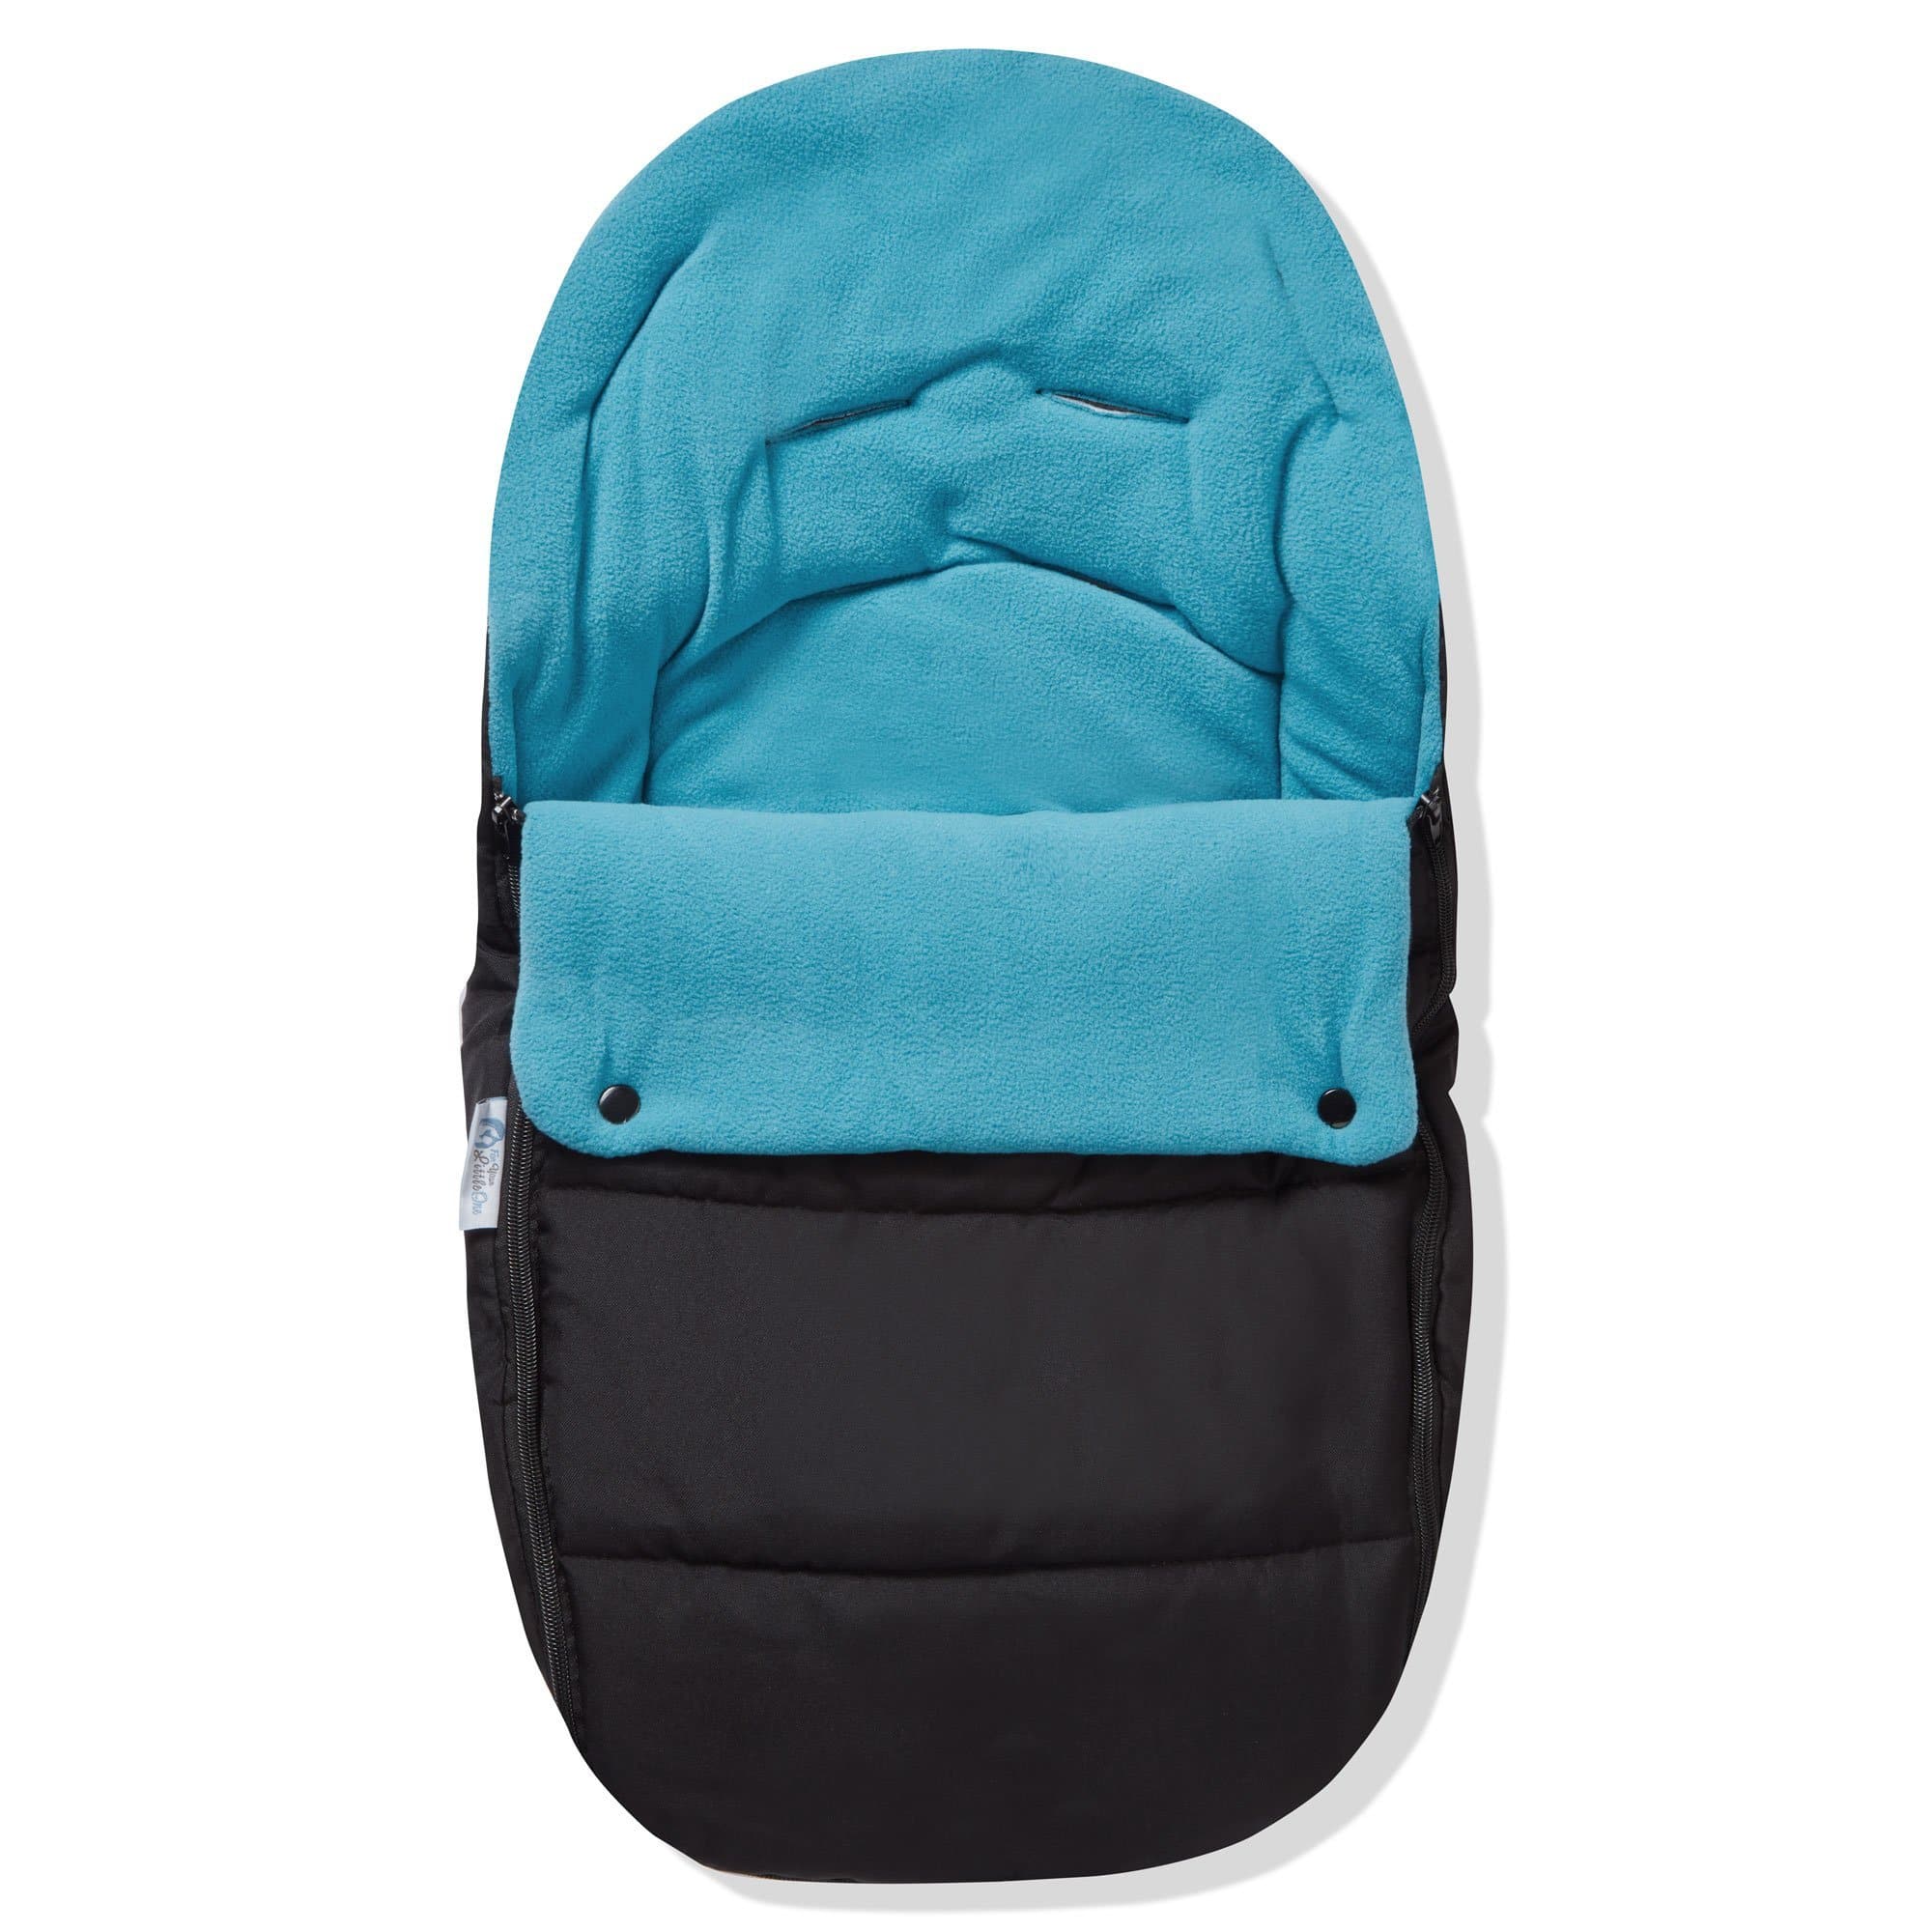 Premium Car Seat Footmuff / Cosy Toes Compatible With GB - Ocean Blue / Fits All Models | For Your Little One